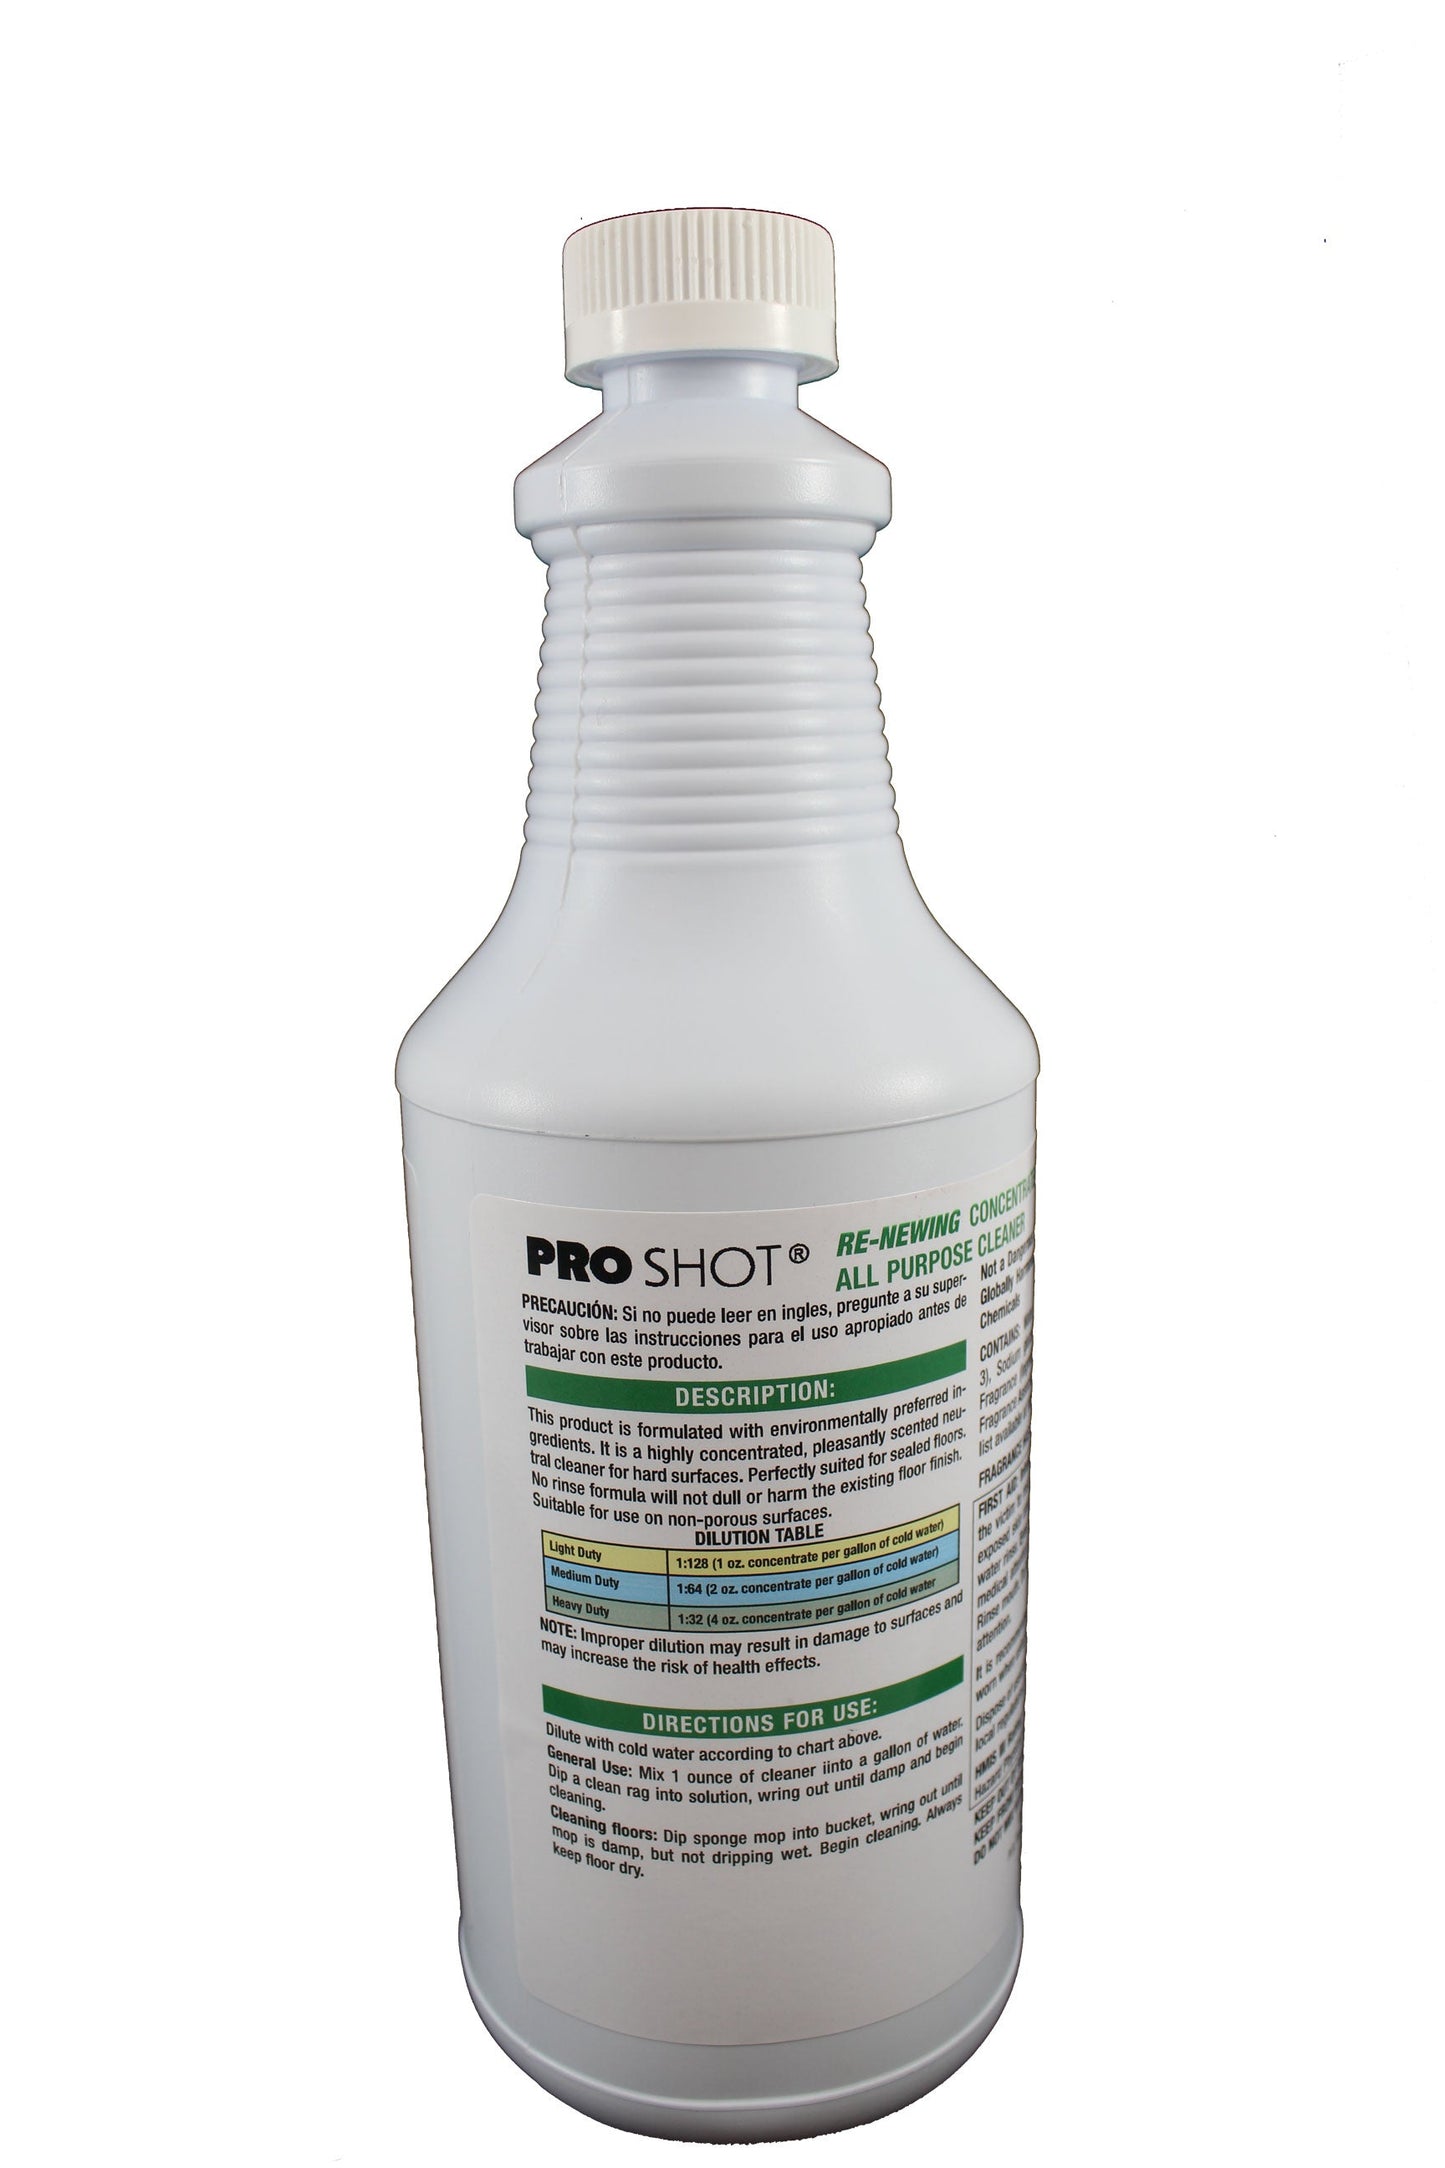 Pro Shot Re-Newing Concentrated All Purpose Cleaner 32 oz directions image